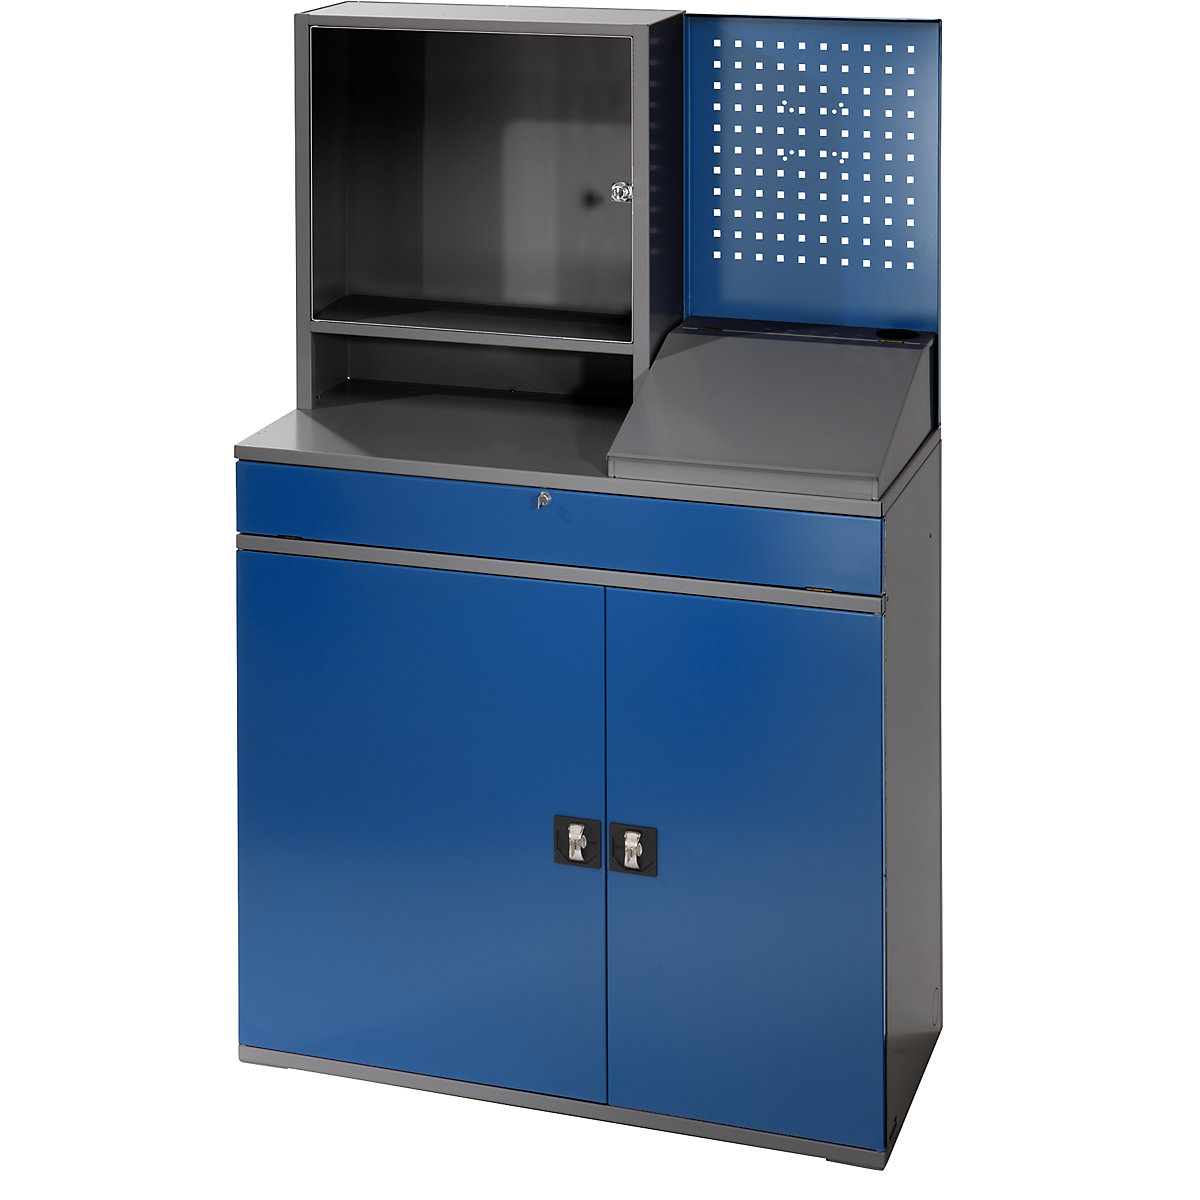 RAU – Computer workstation, monitor housing, 2 pull-out shelves, width 1100 mm, charcoal / gentian blue